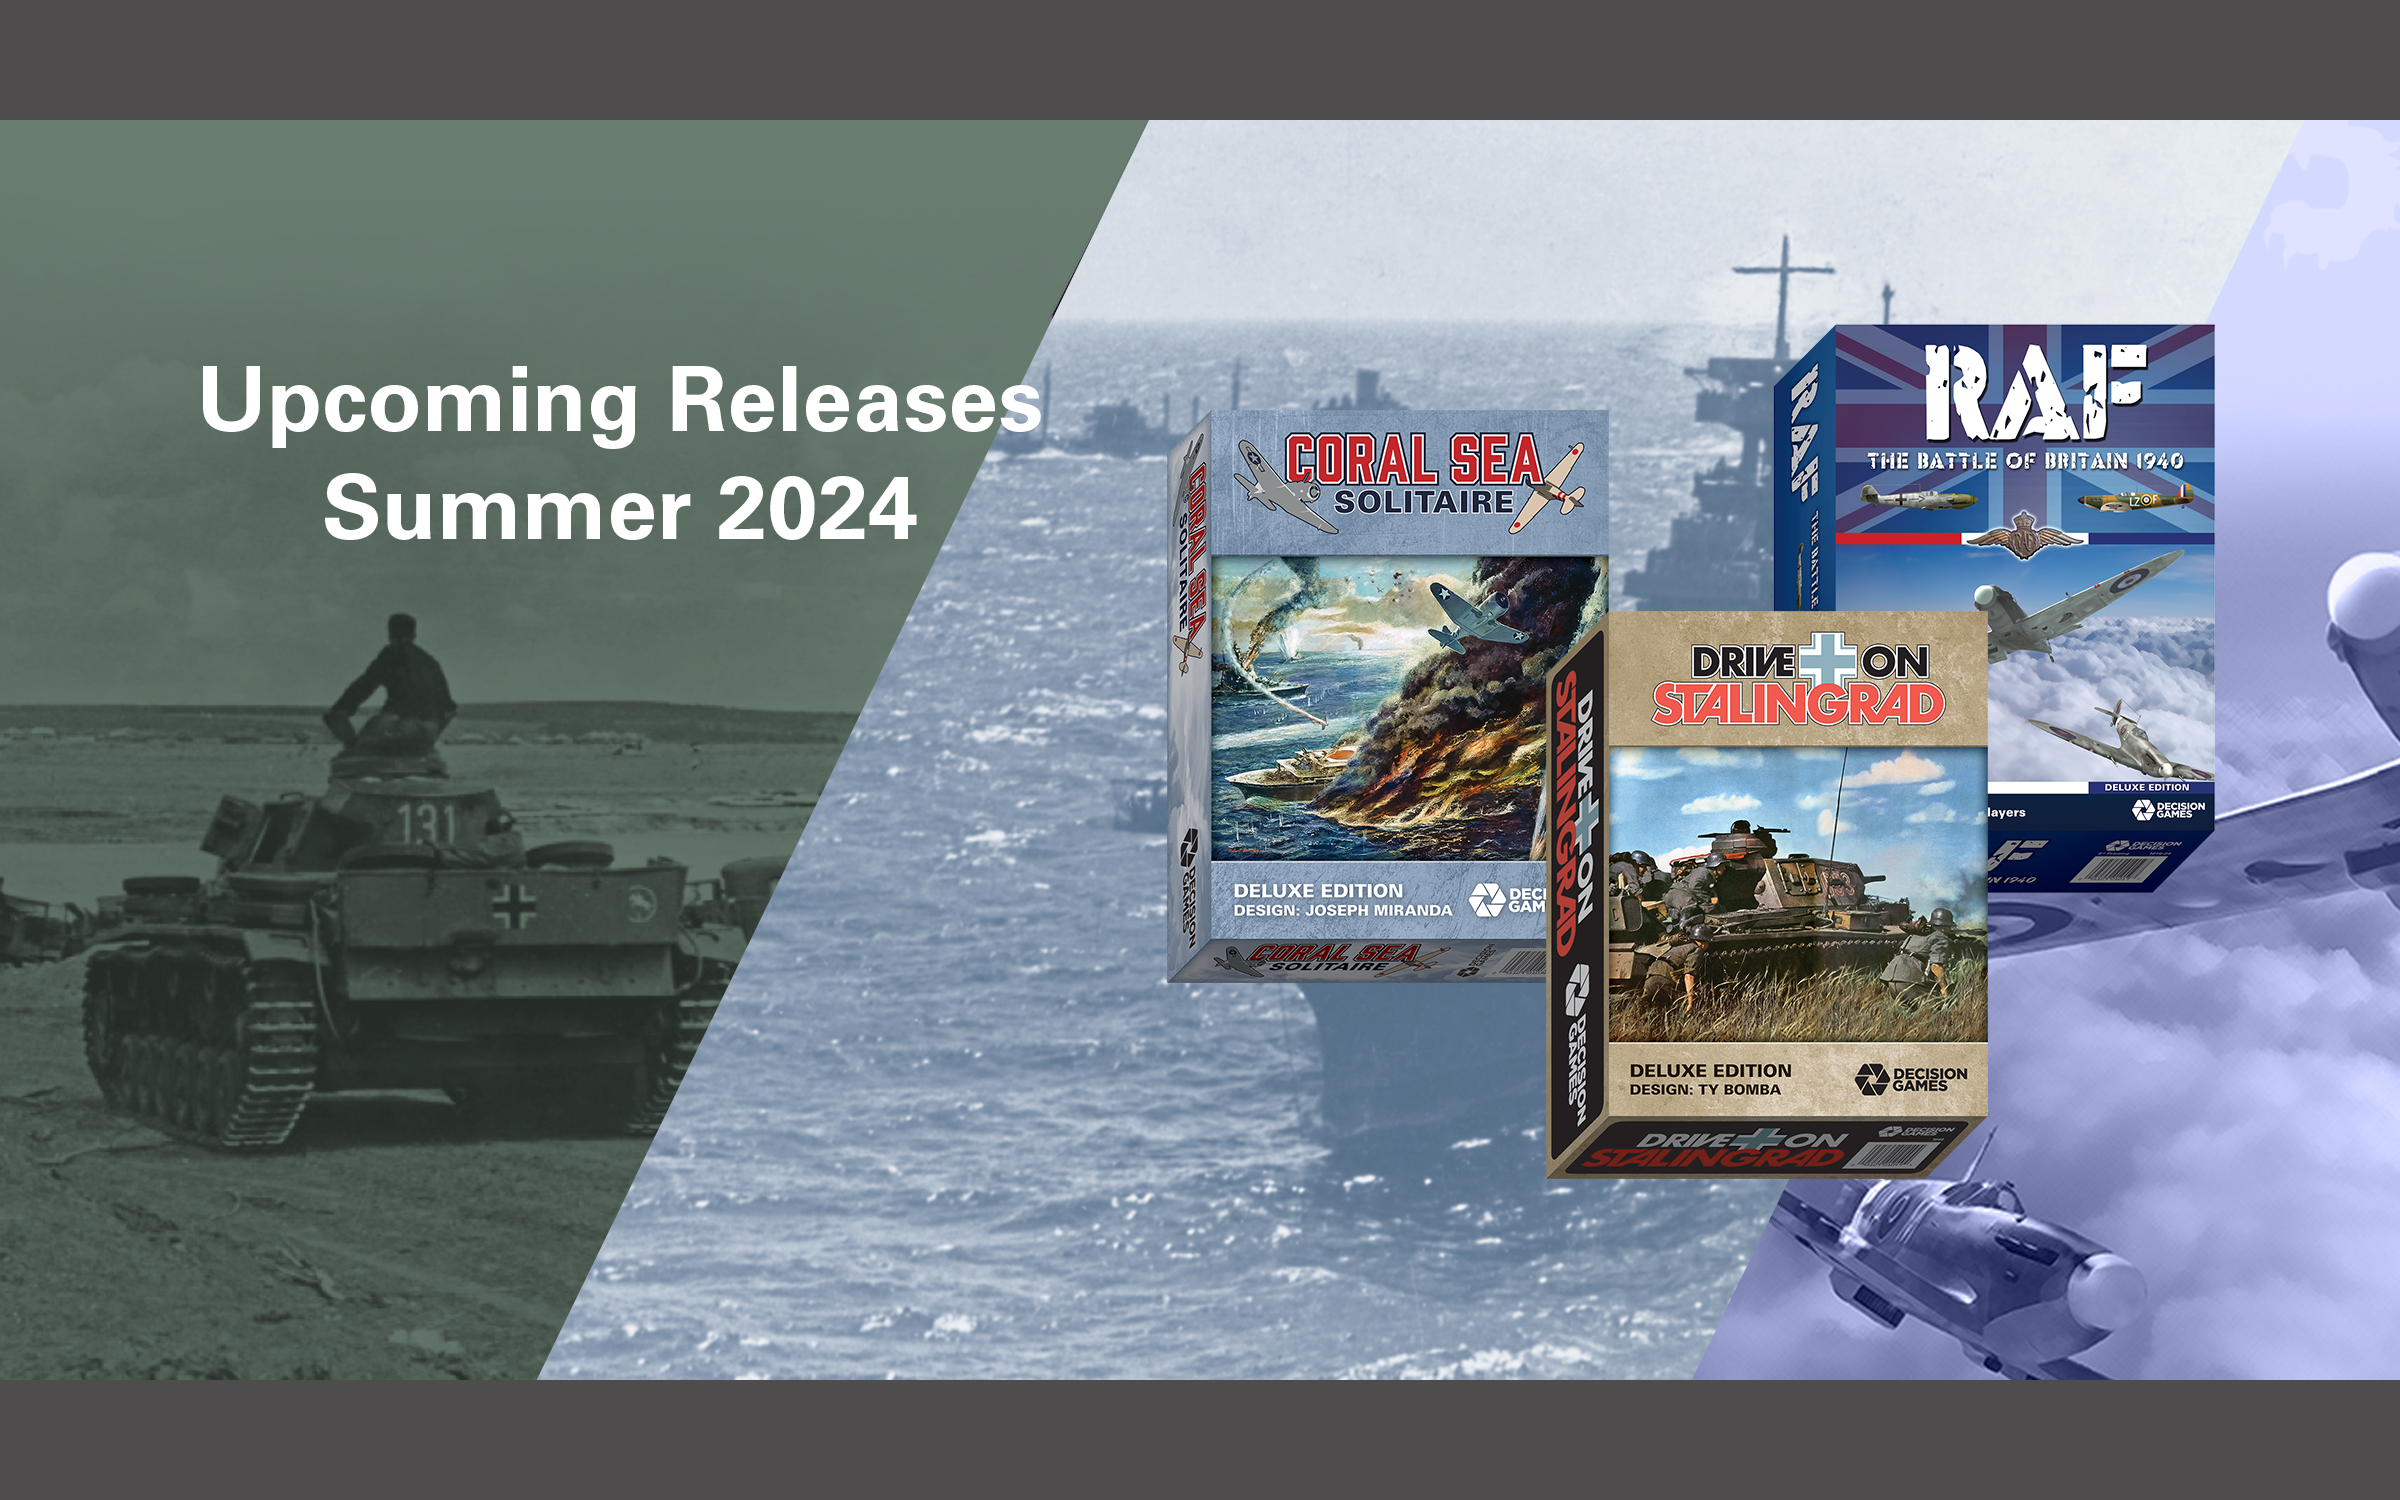 advertisement for upcoming releases summer 2024